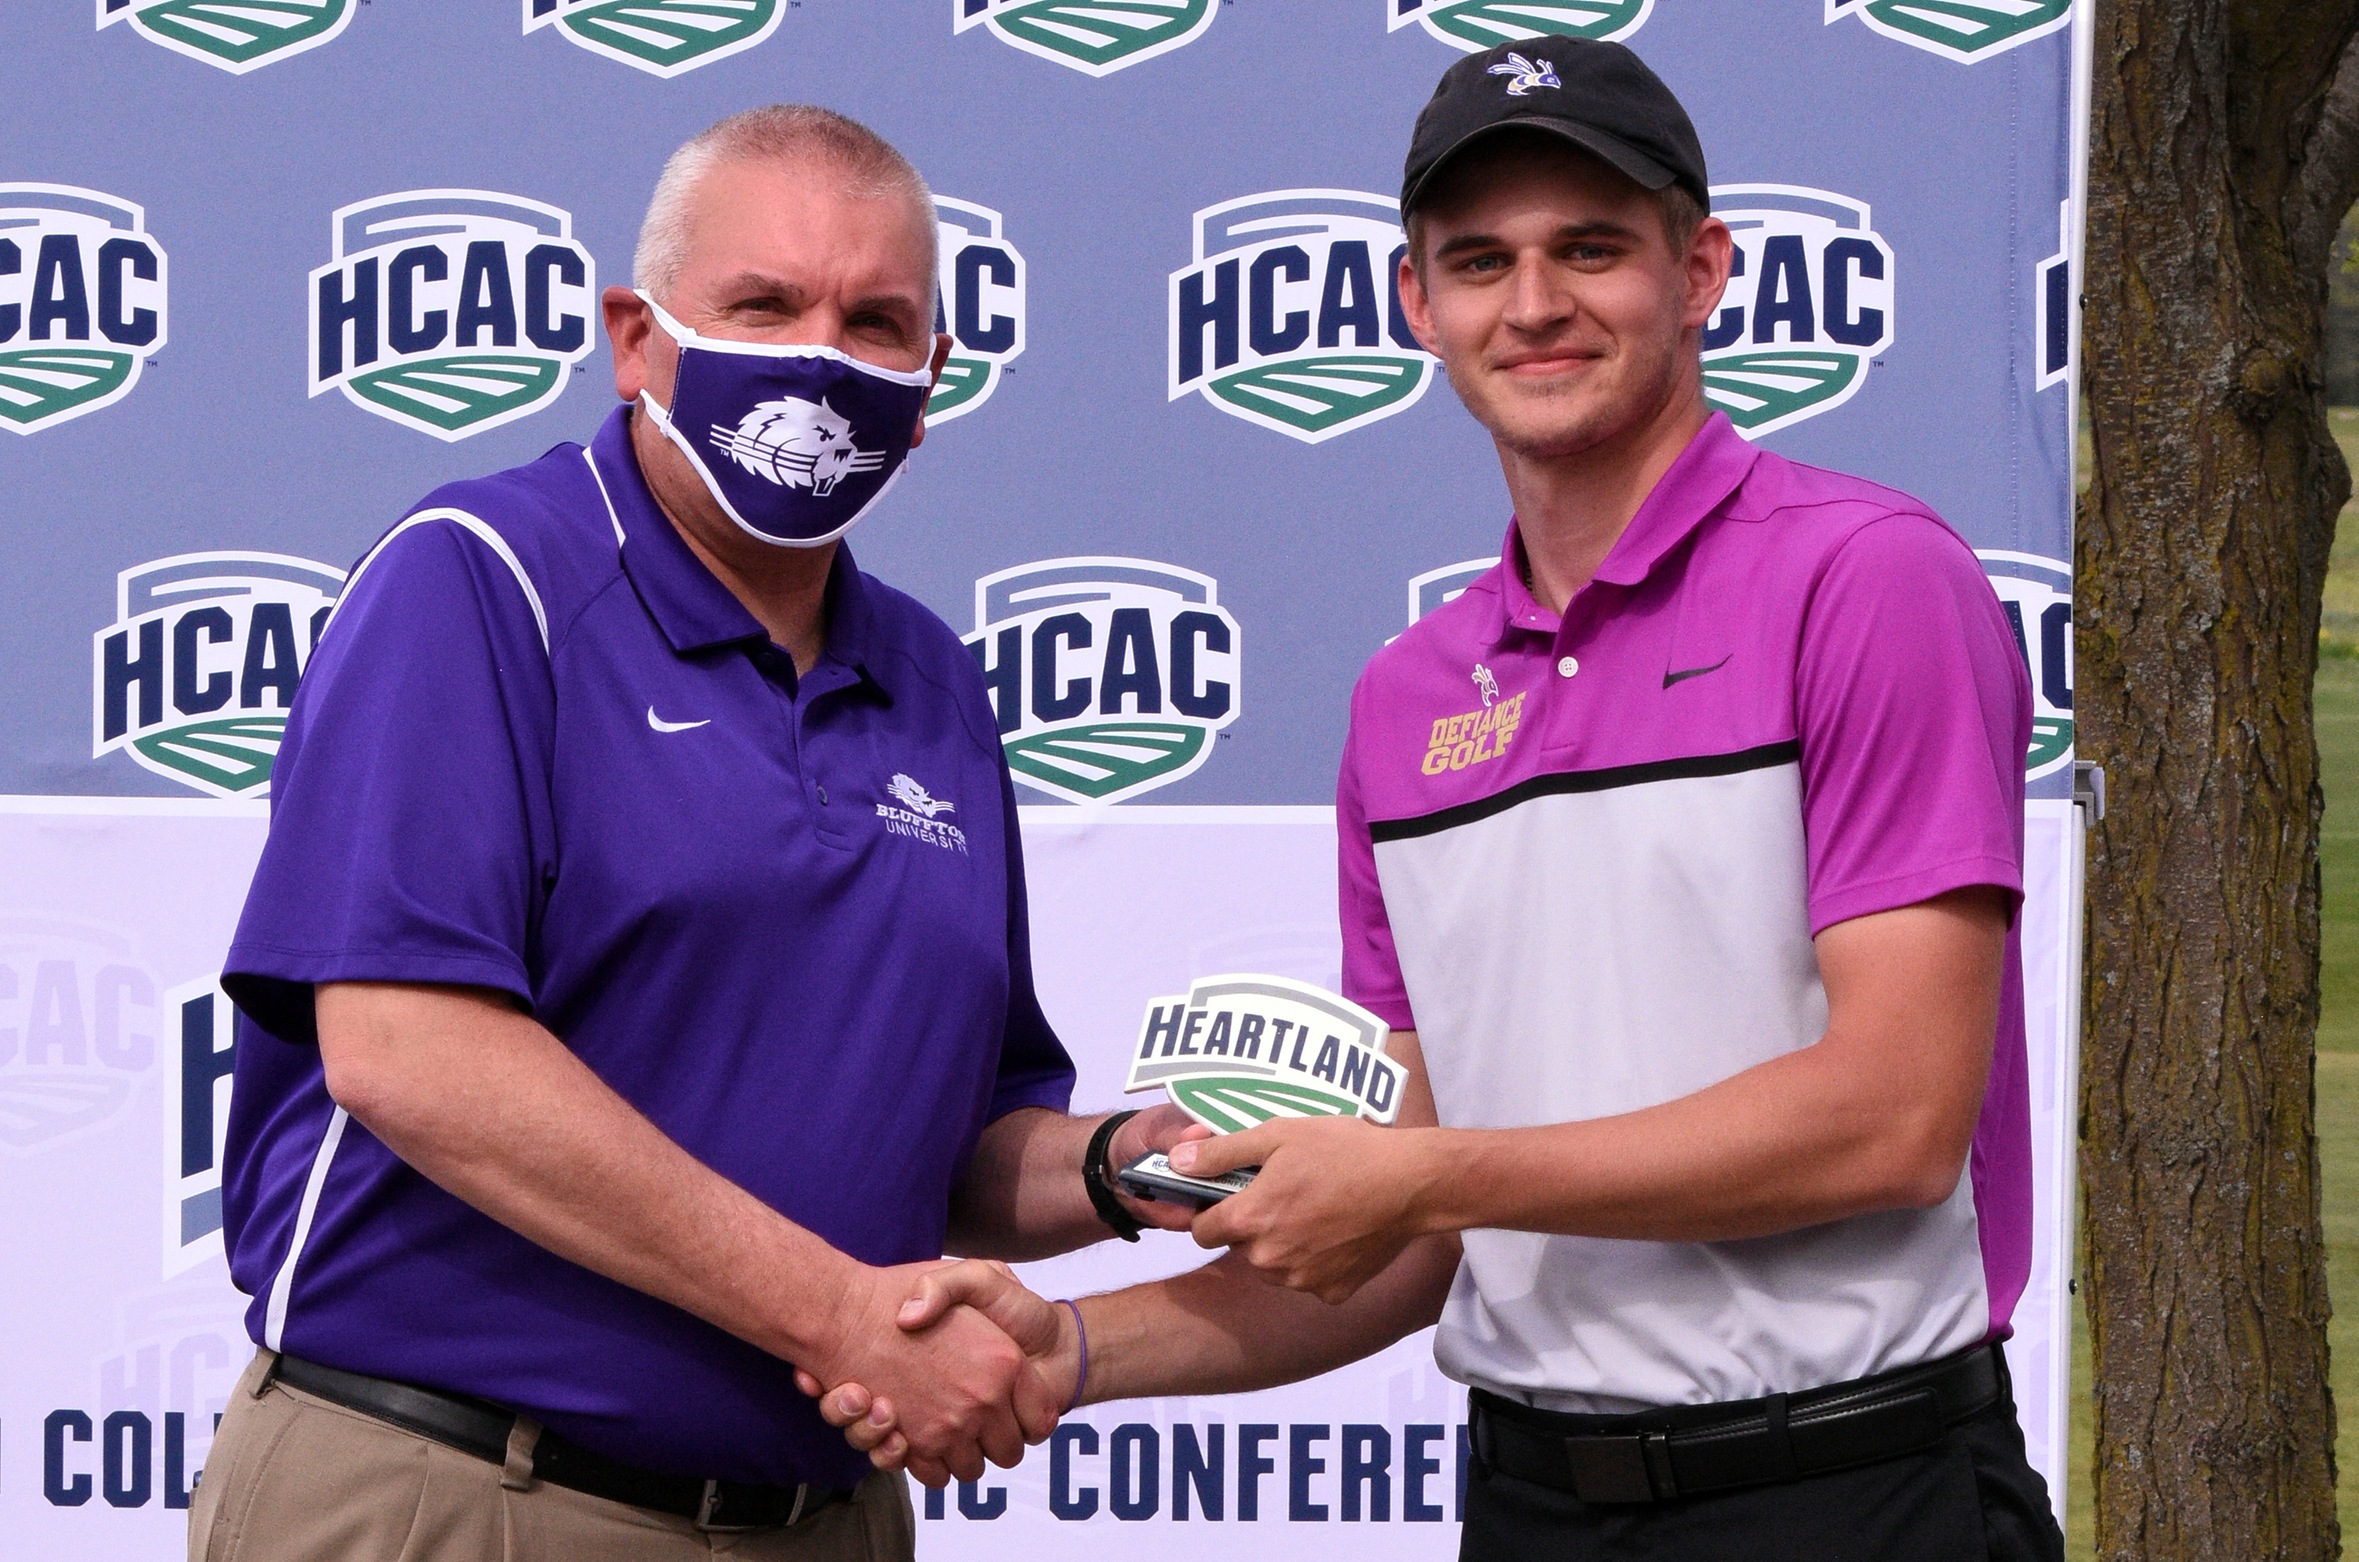 Men’s golf led by Clingaman, who shoots 2-under 70 to earn All-HCAC honors